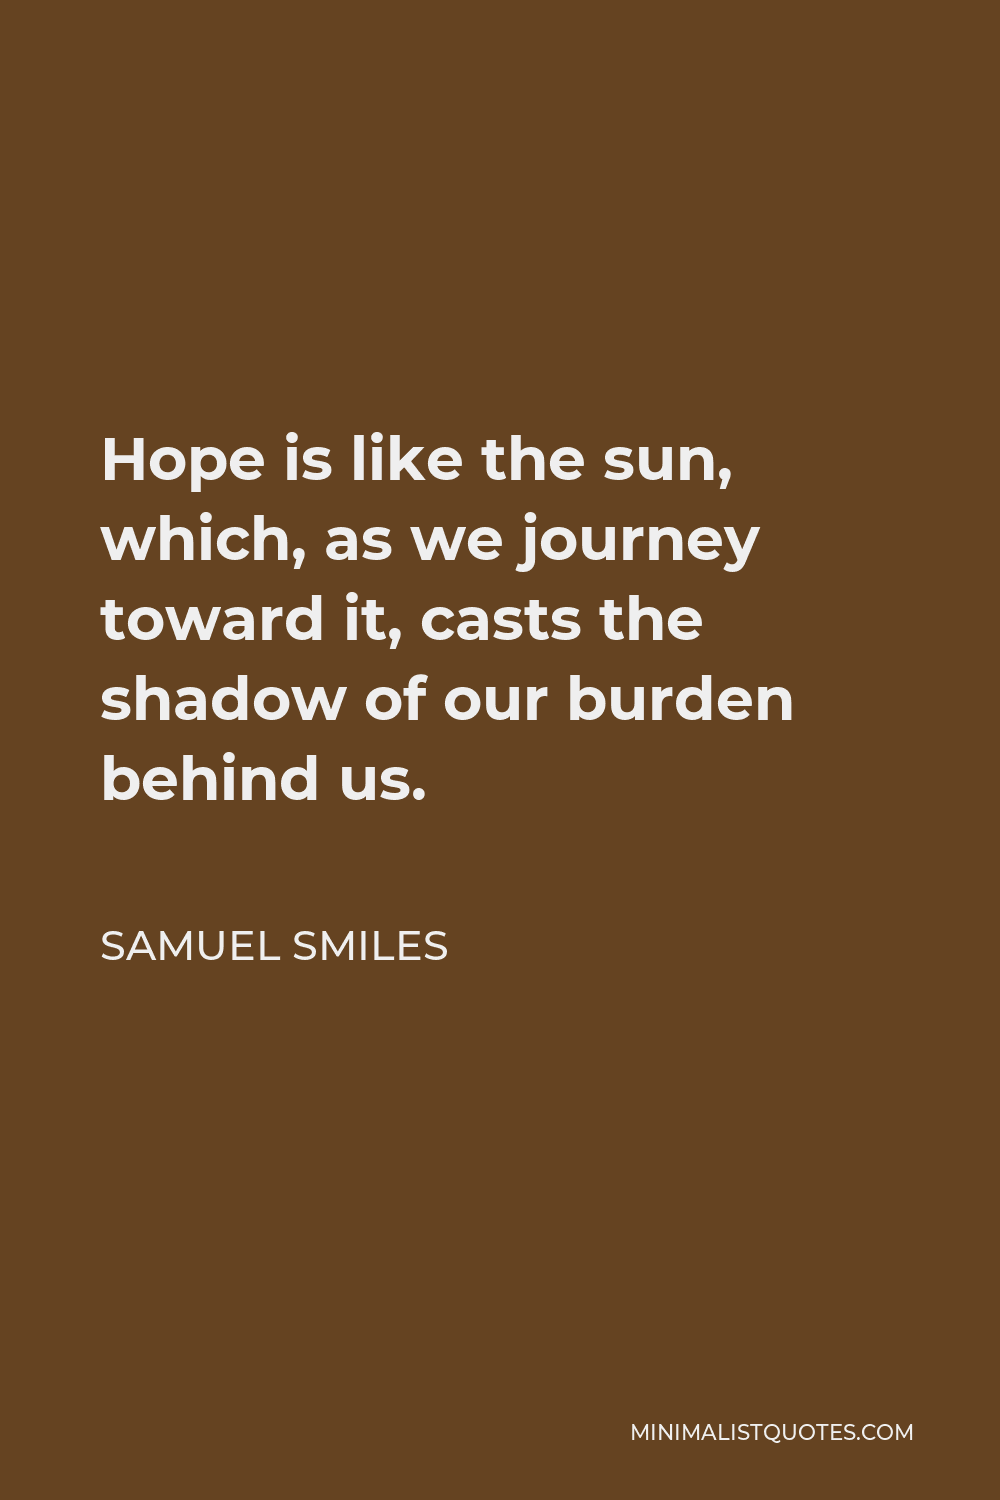 Samuel Smiles Quote - Hope is like the sun, which, as we journey toward it, casts the shadow of our burden behind us.